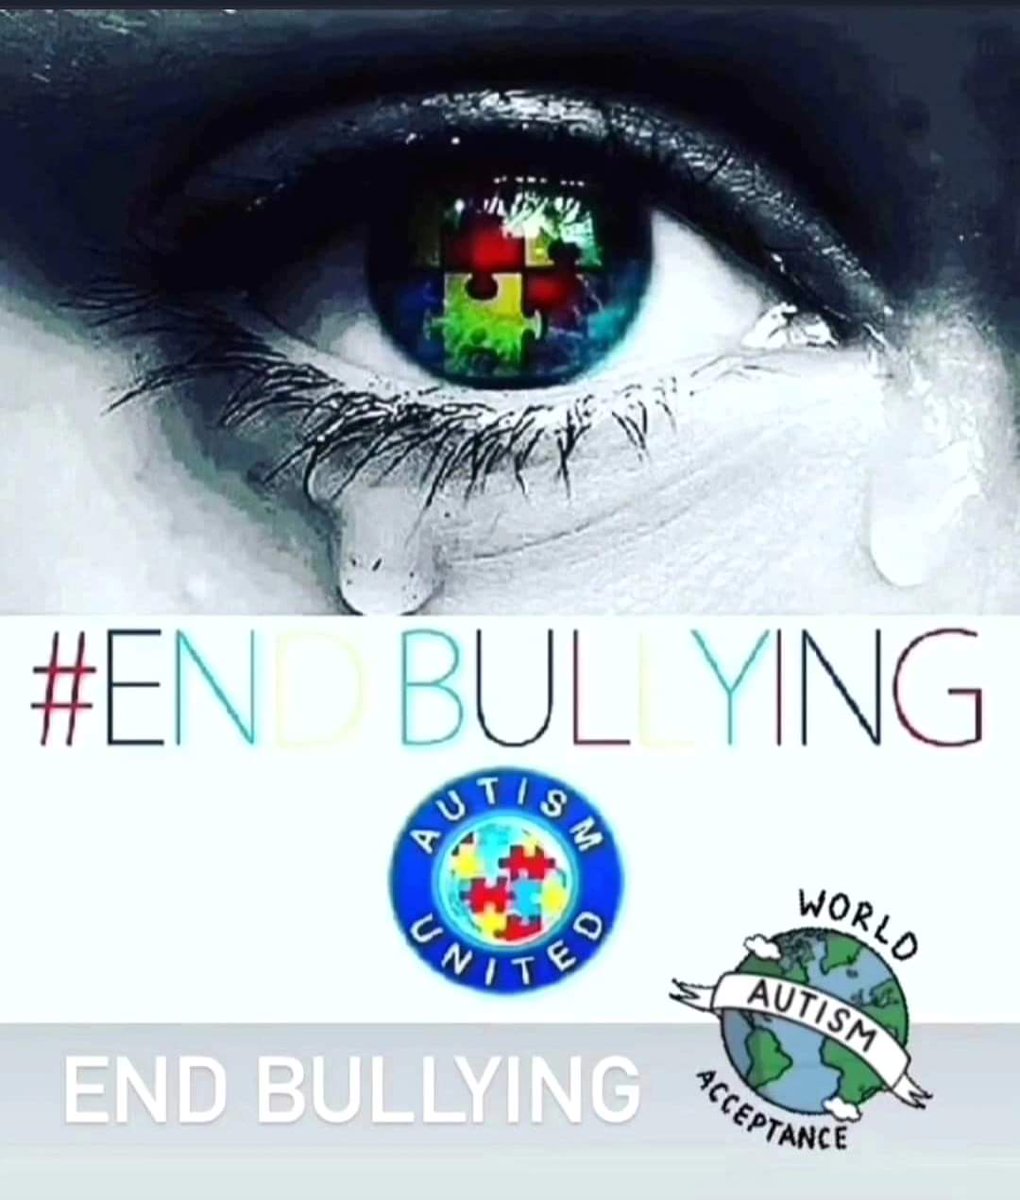 🗣 #endbullying Just so you know 🤔💙❤💚💜💛 #autismacceptance 🙌🏽 Every day is autism awareness day in our house #autism #autismdad #autismawareness #autismawarenessmonth #autismfamily #autismparent #autismrocks #differentnotless 🙋🏽‍♂️🙋‍♀️ Let's Band together to raise awareness 🙏👊